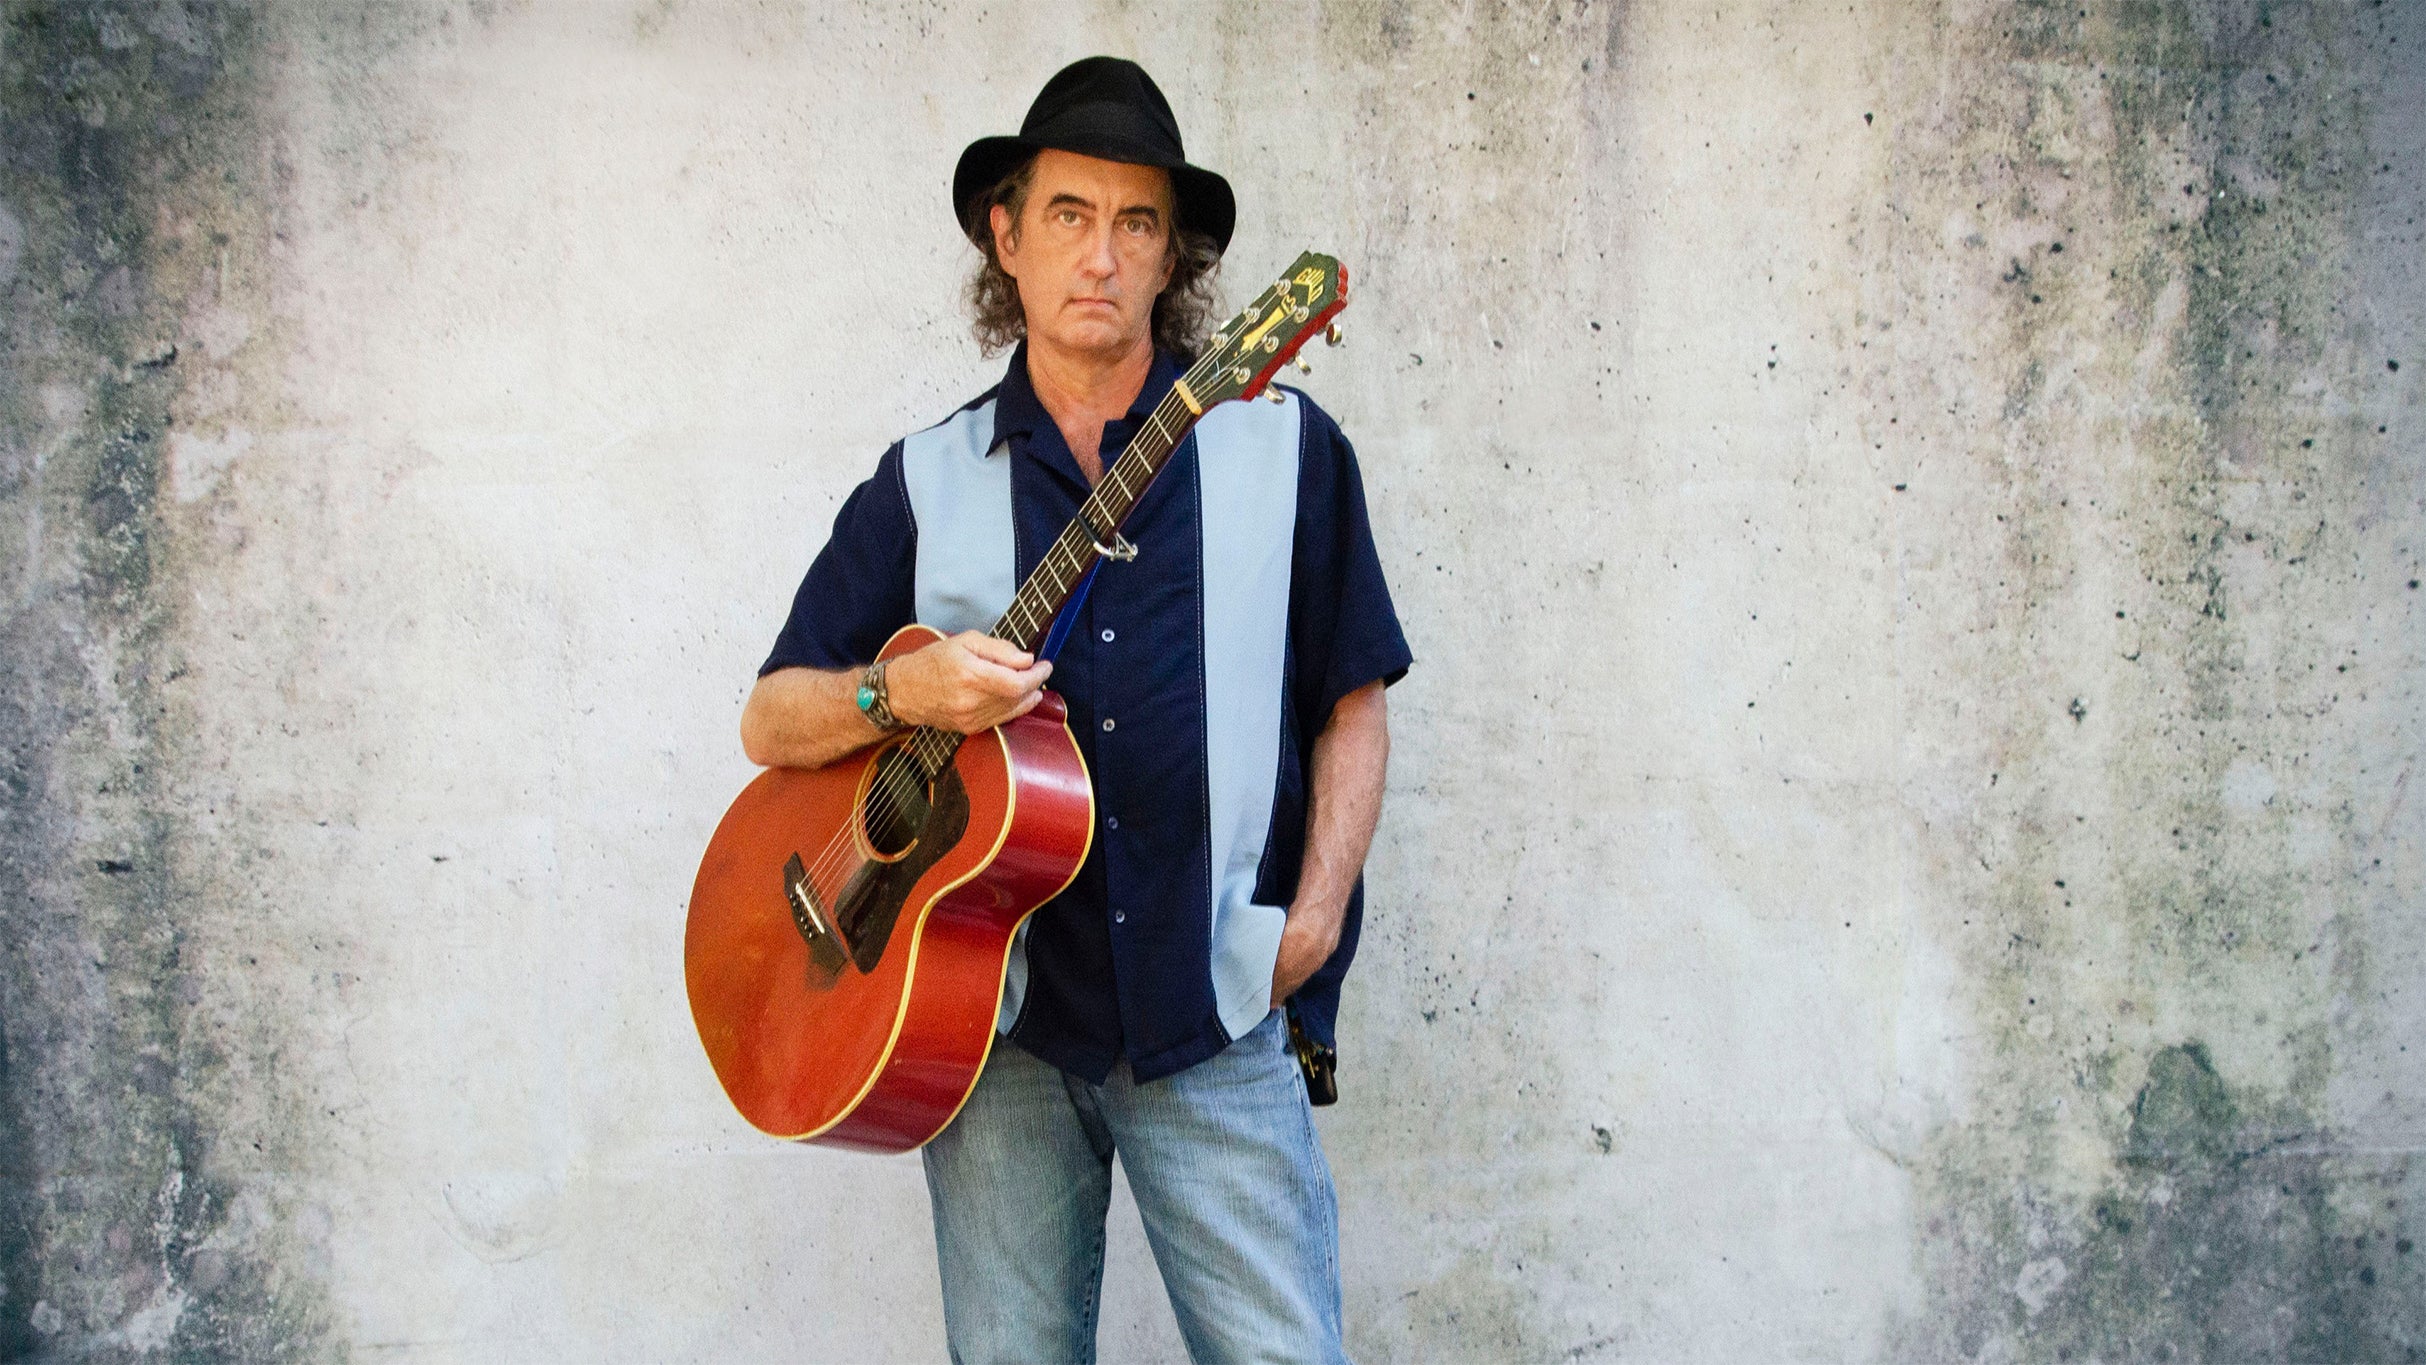 James McMurtry presale password for advance tickets in Knoxville